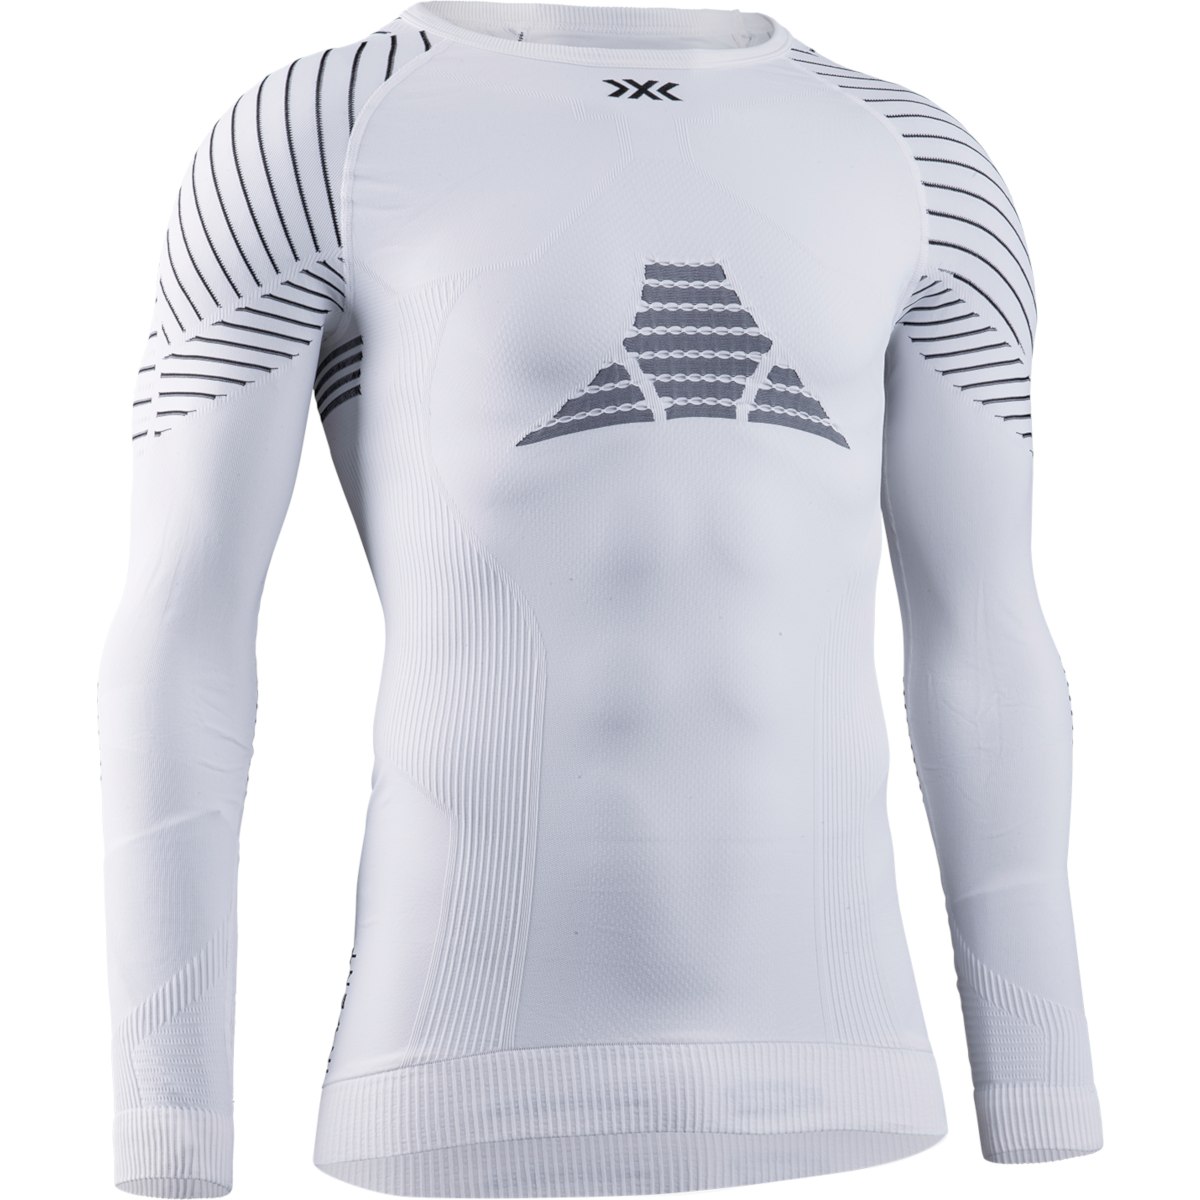 Image of X-Bionic Invent 4.0 Shirt Round Neck Long Sleeves Shirt for Men - white/black